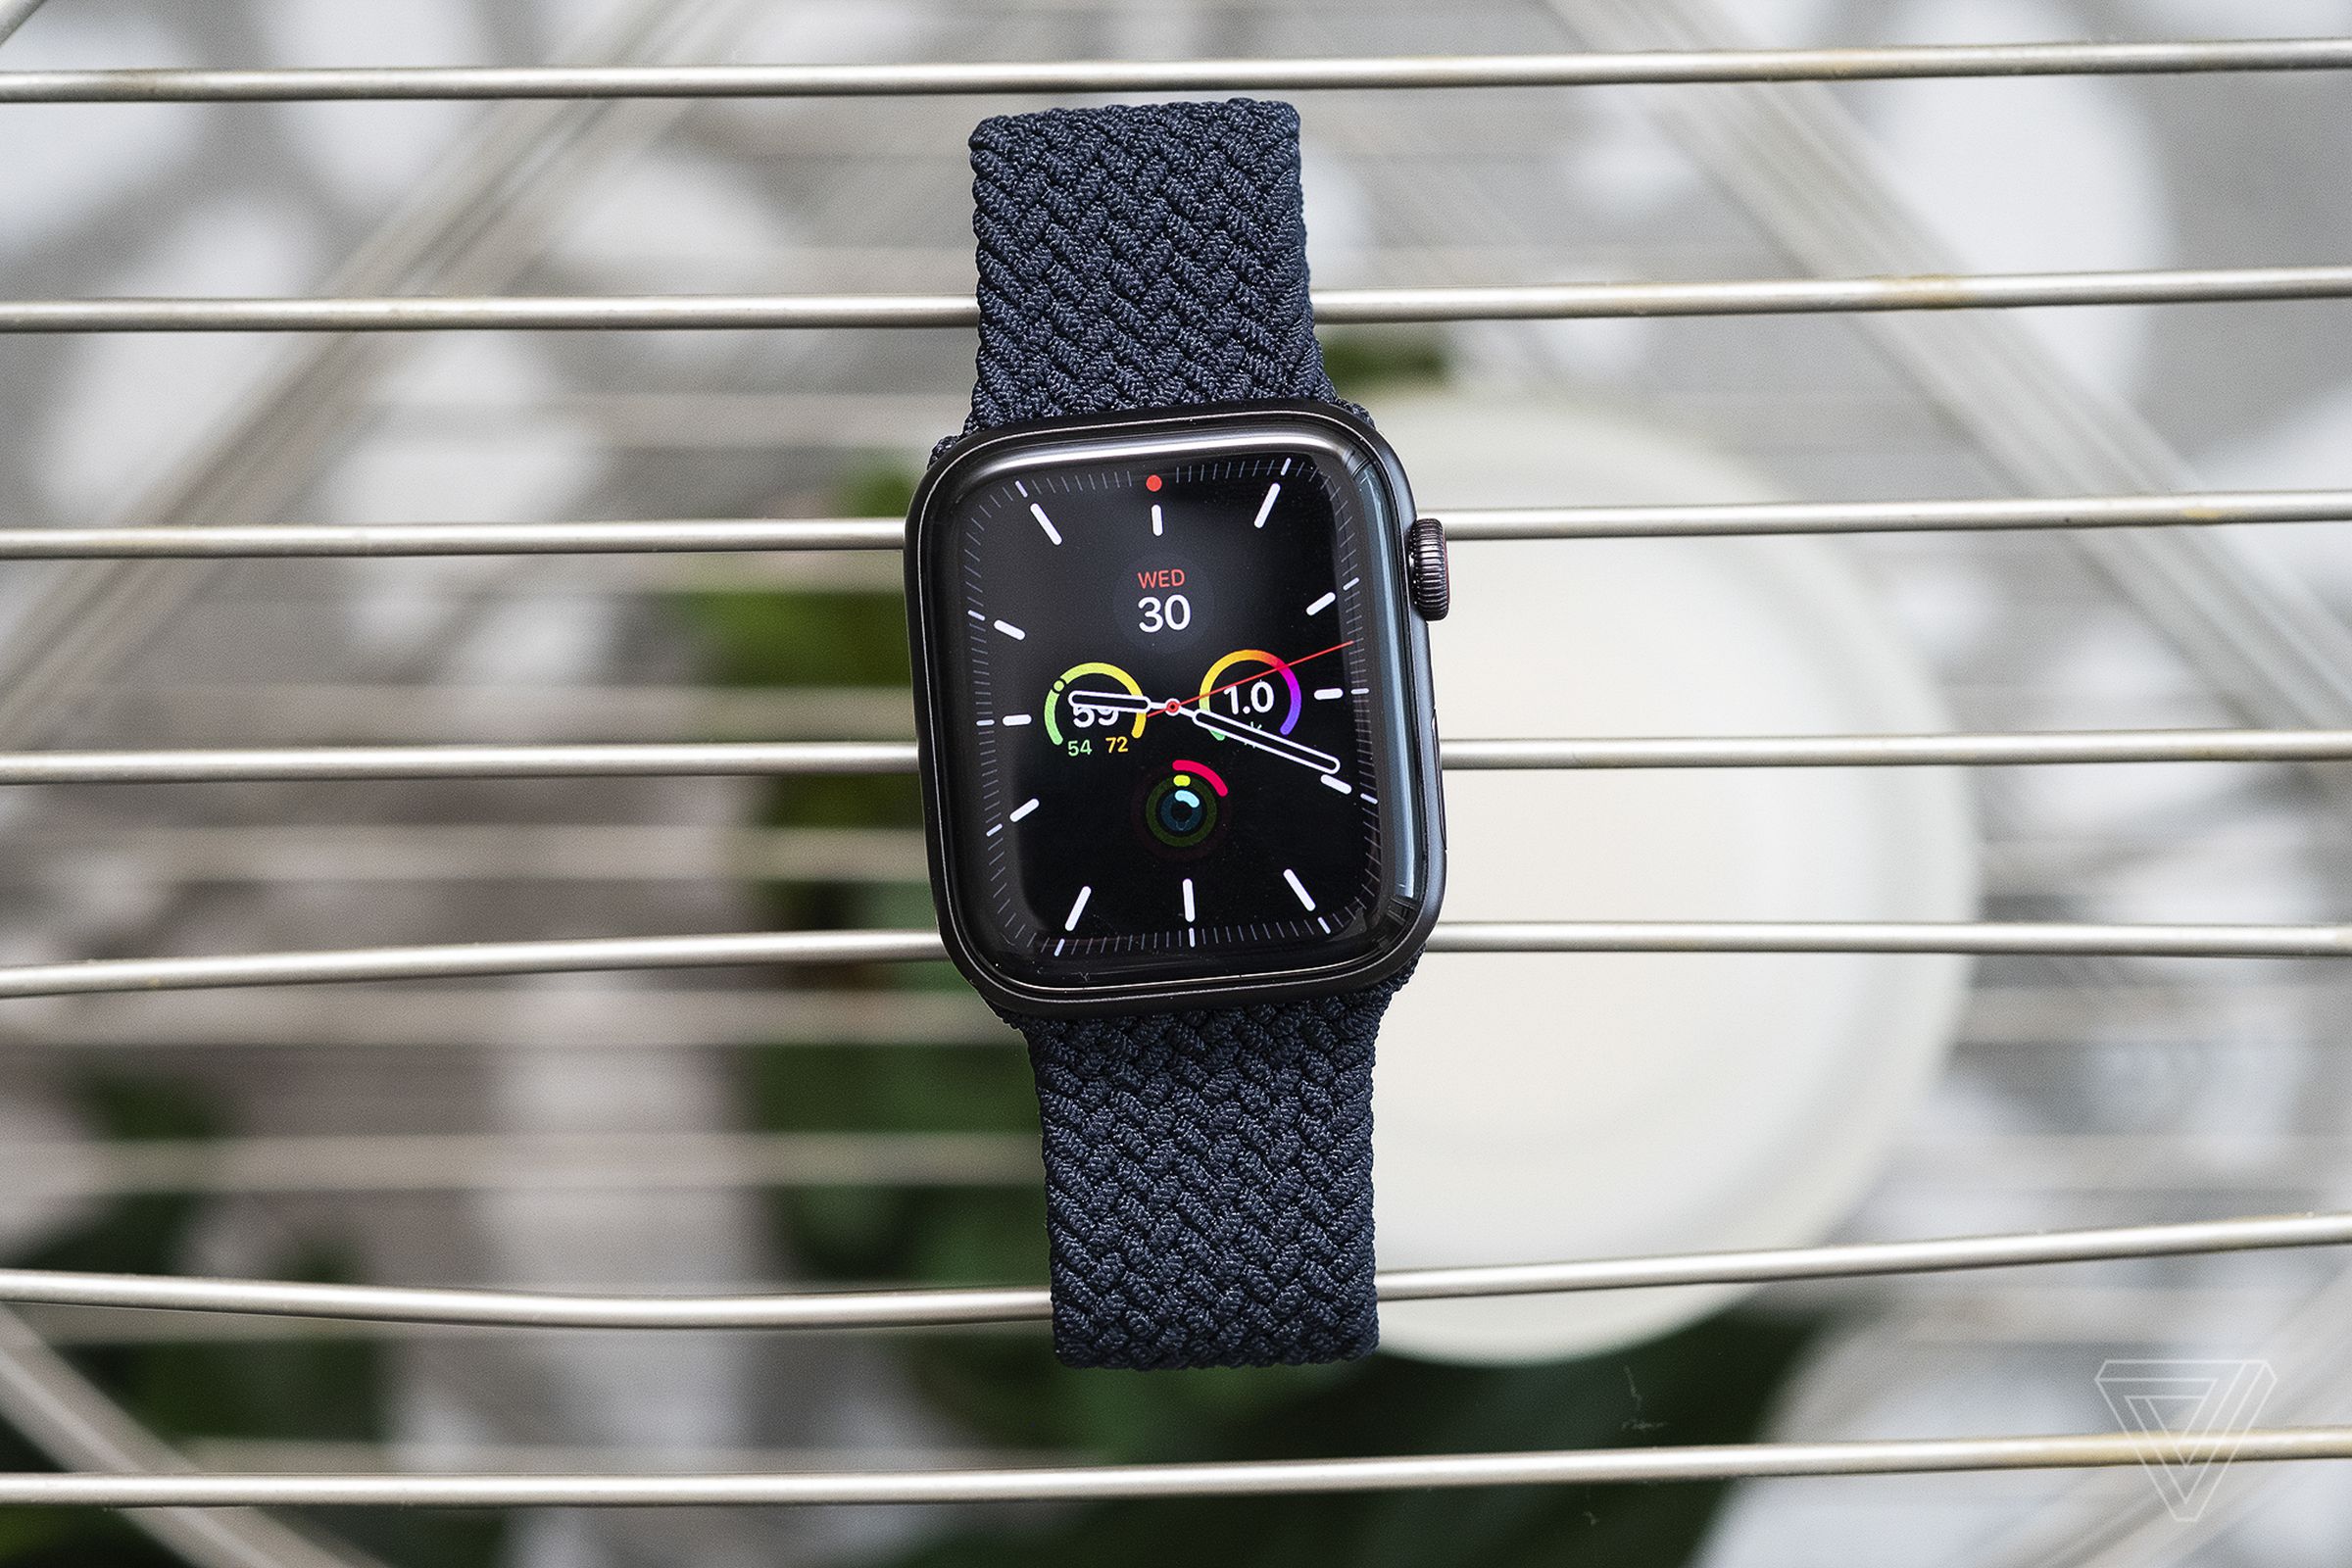 The current Apple Watch SE, pictured here, starts at $279 and features an S5 chip, but lacks an always-on display.